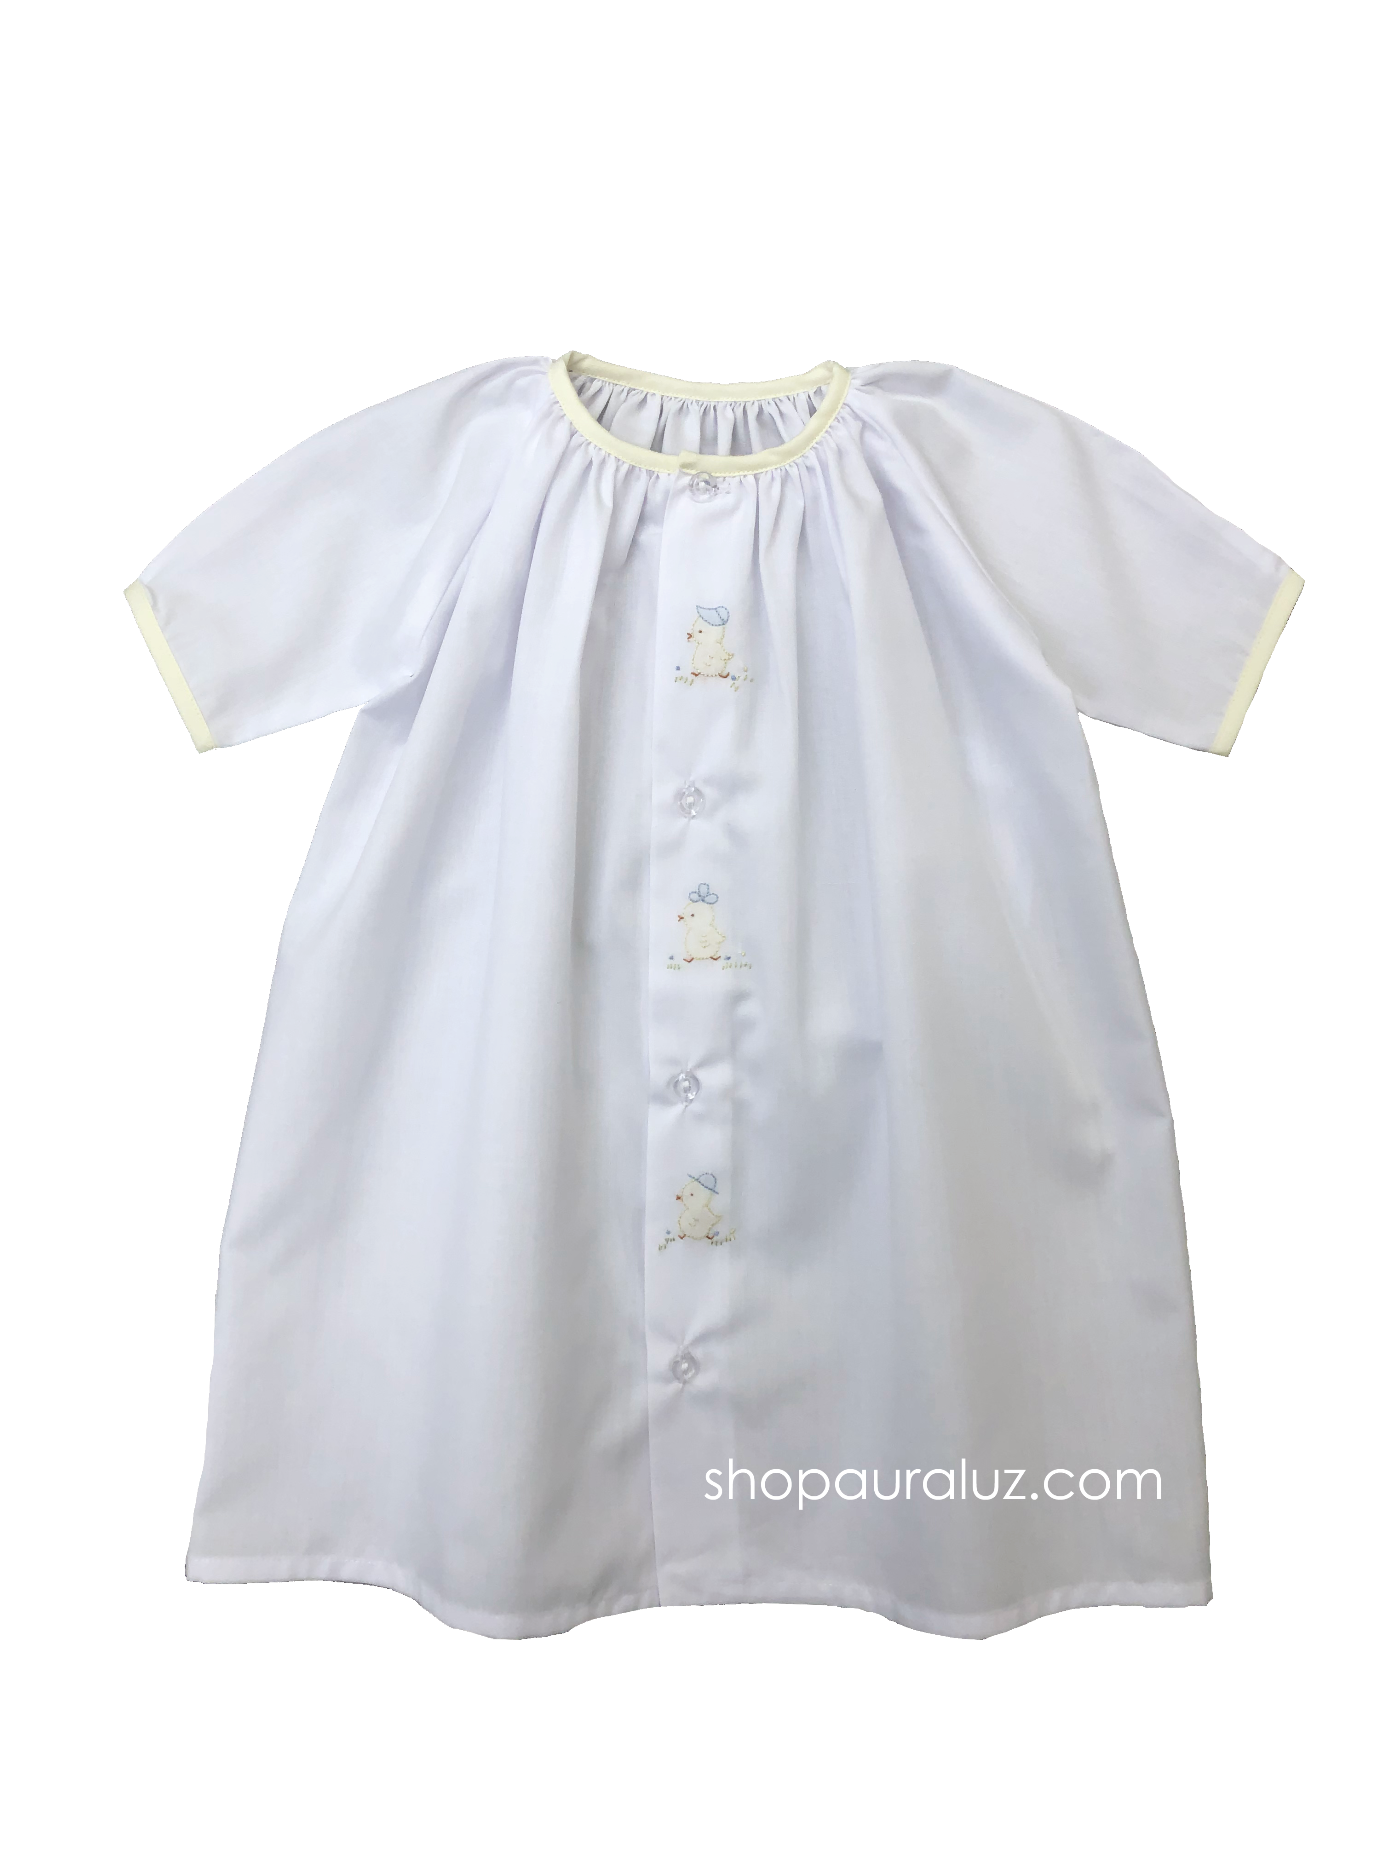 Auraluz Day Gown, l/s...White with yellow binding trim and embroidered chicks